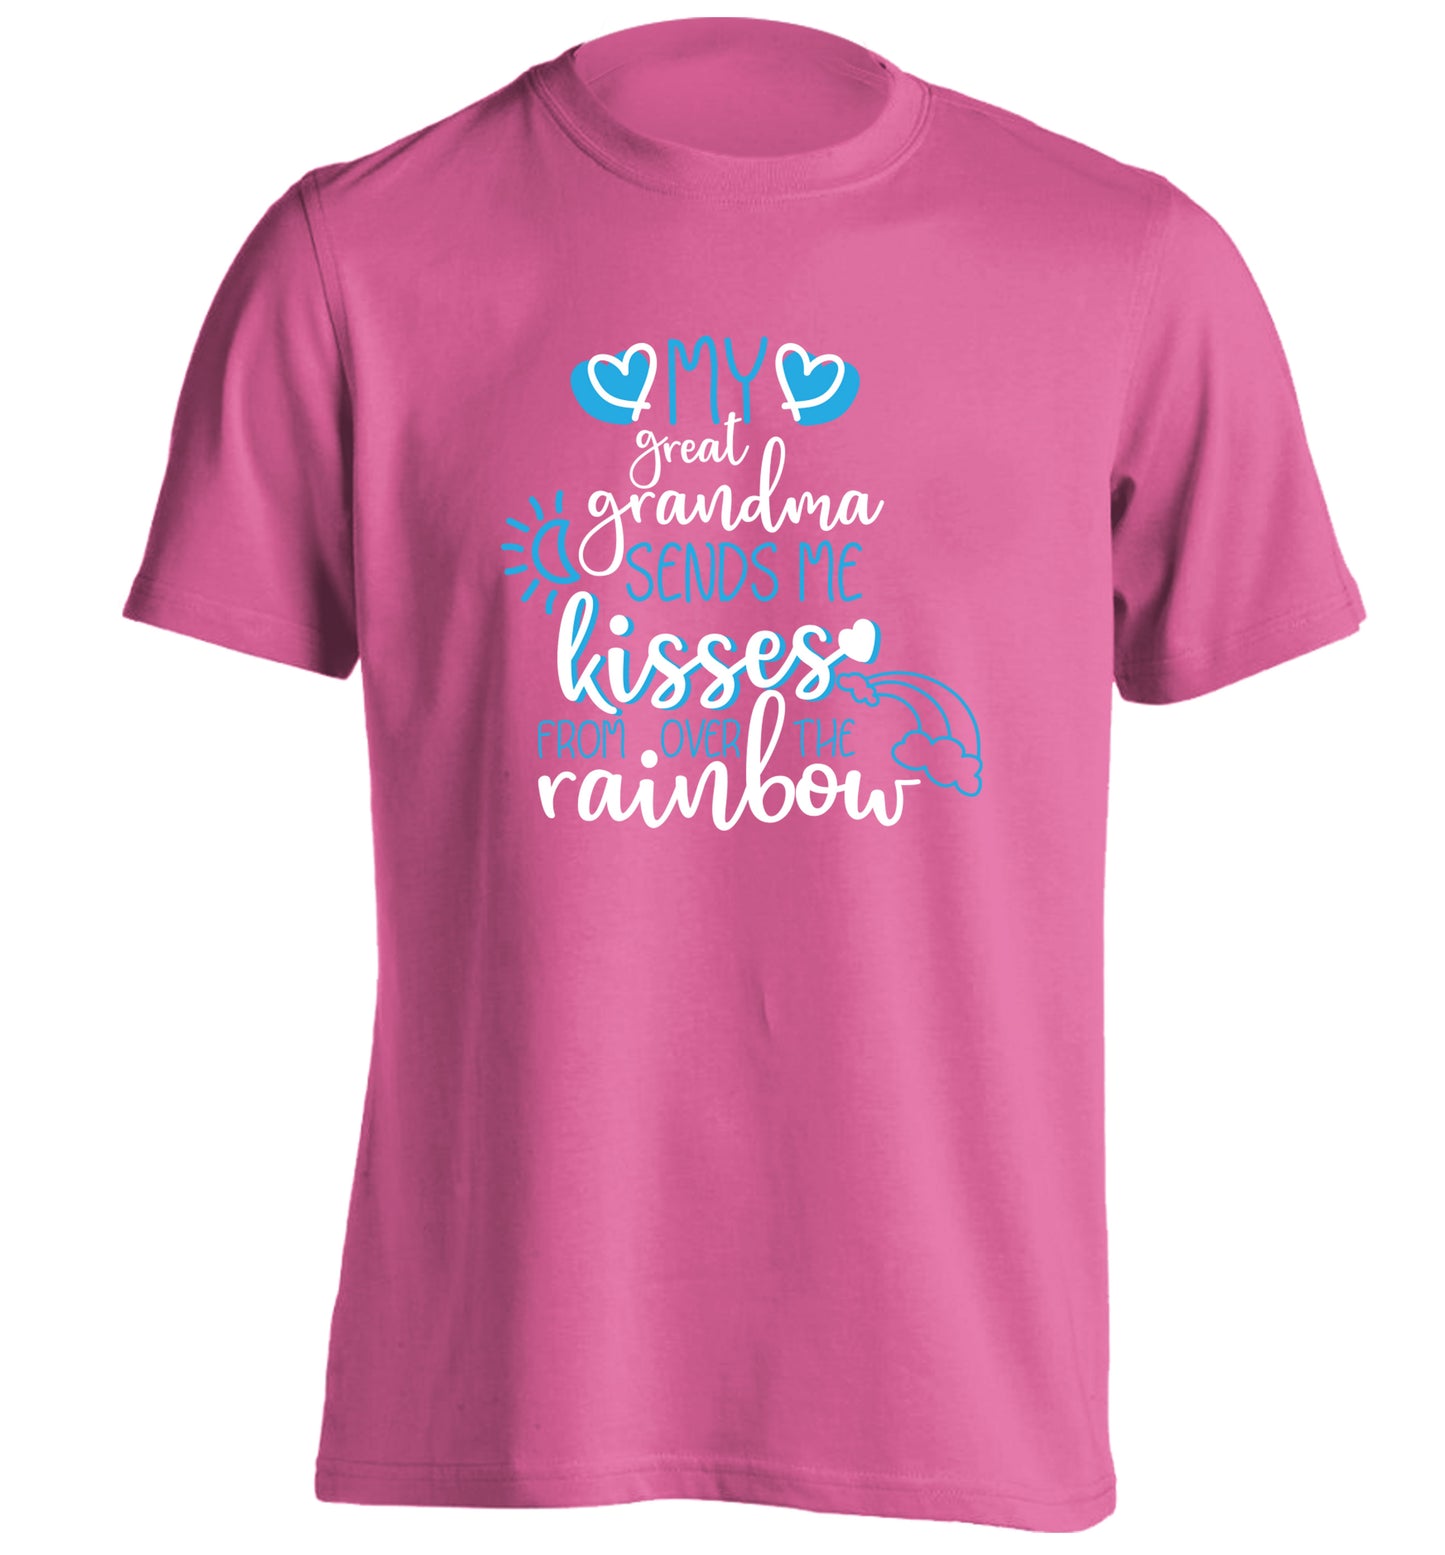 My great grandma sends me kisses from over the rainbow adults unisex pink Tshirt 2XL